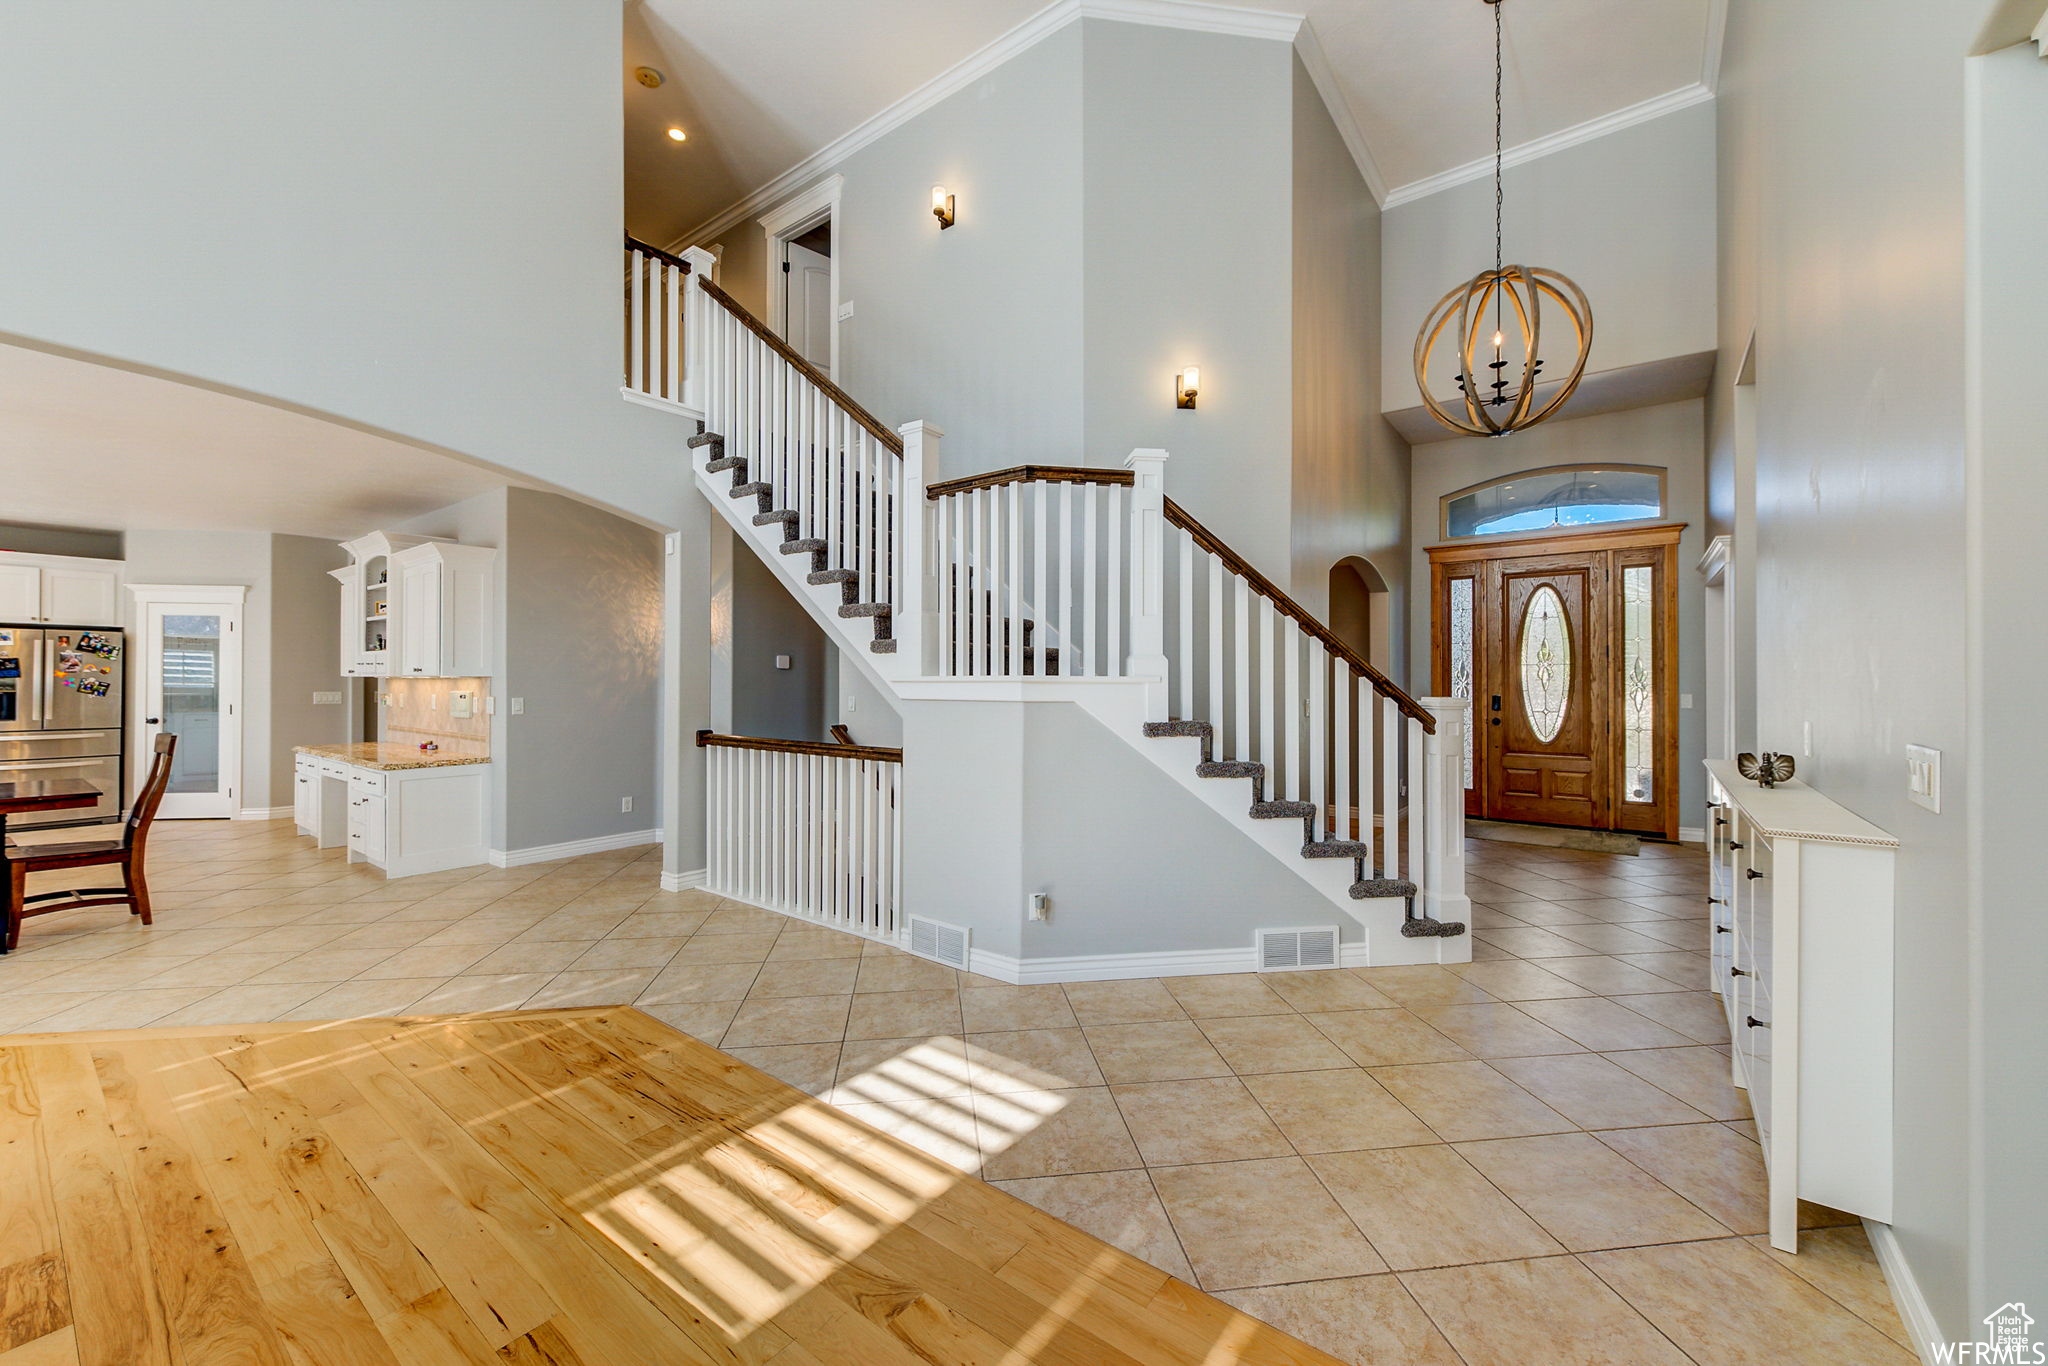 Tiled entrance foyer with an inviting chandelier, ornamental molding, and a towering ceiling